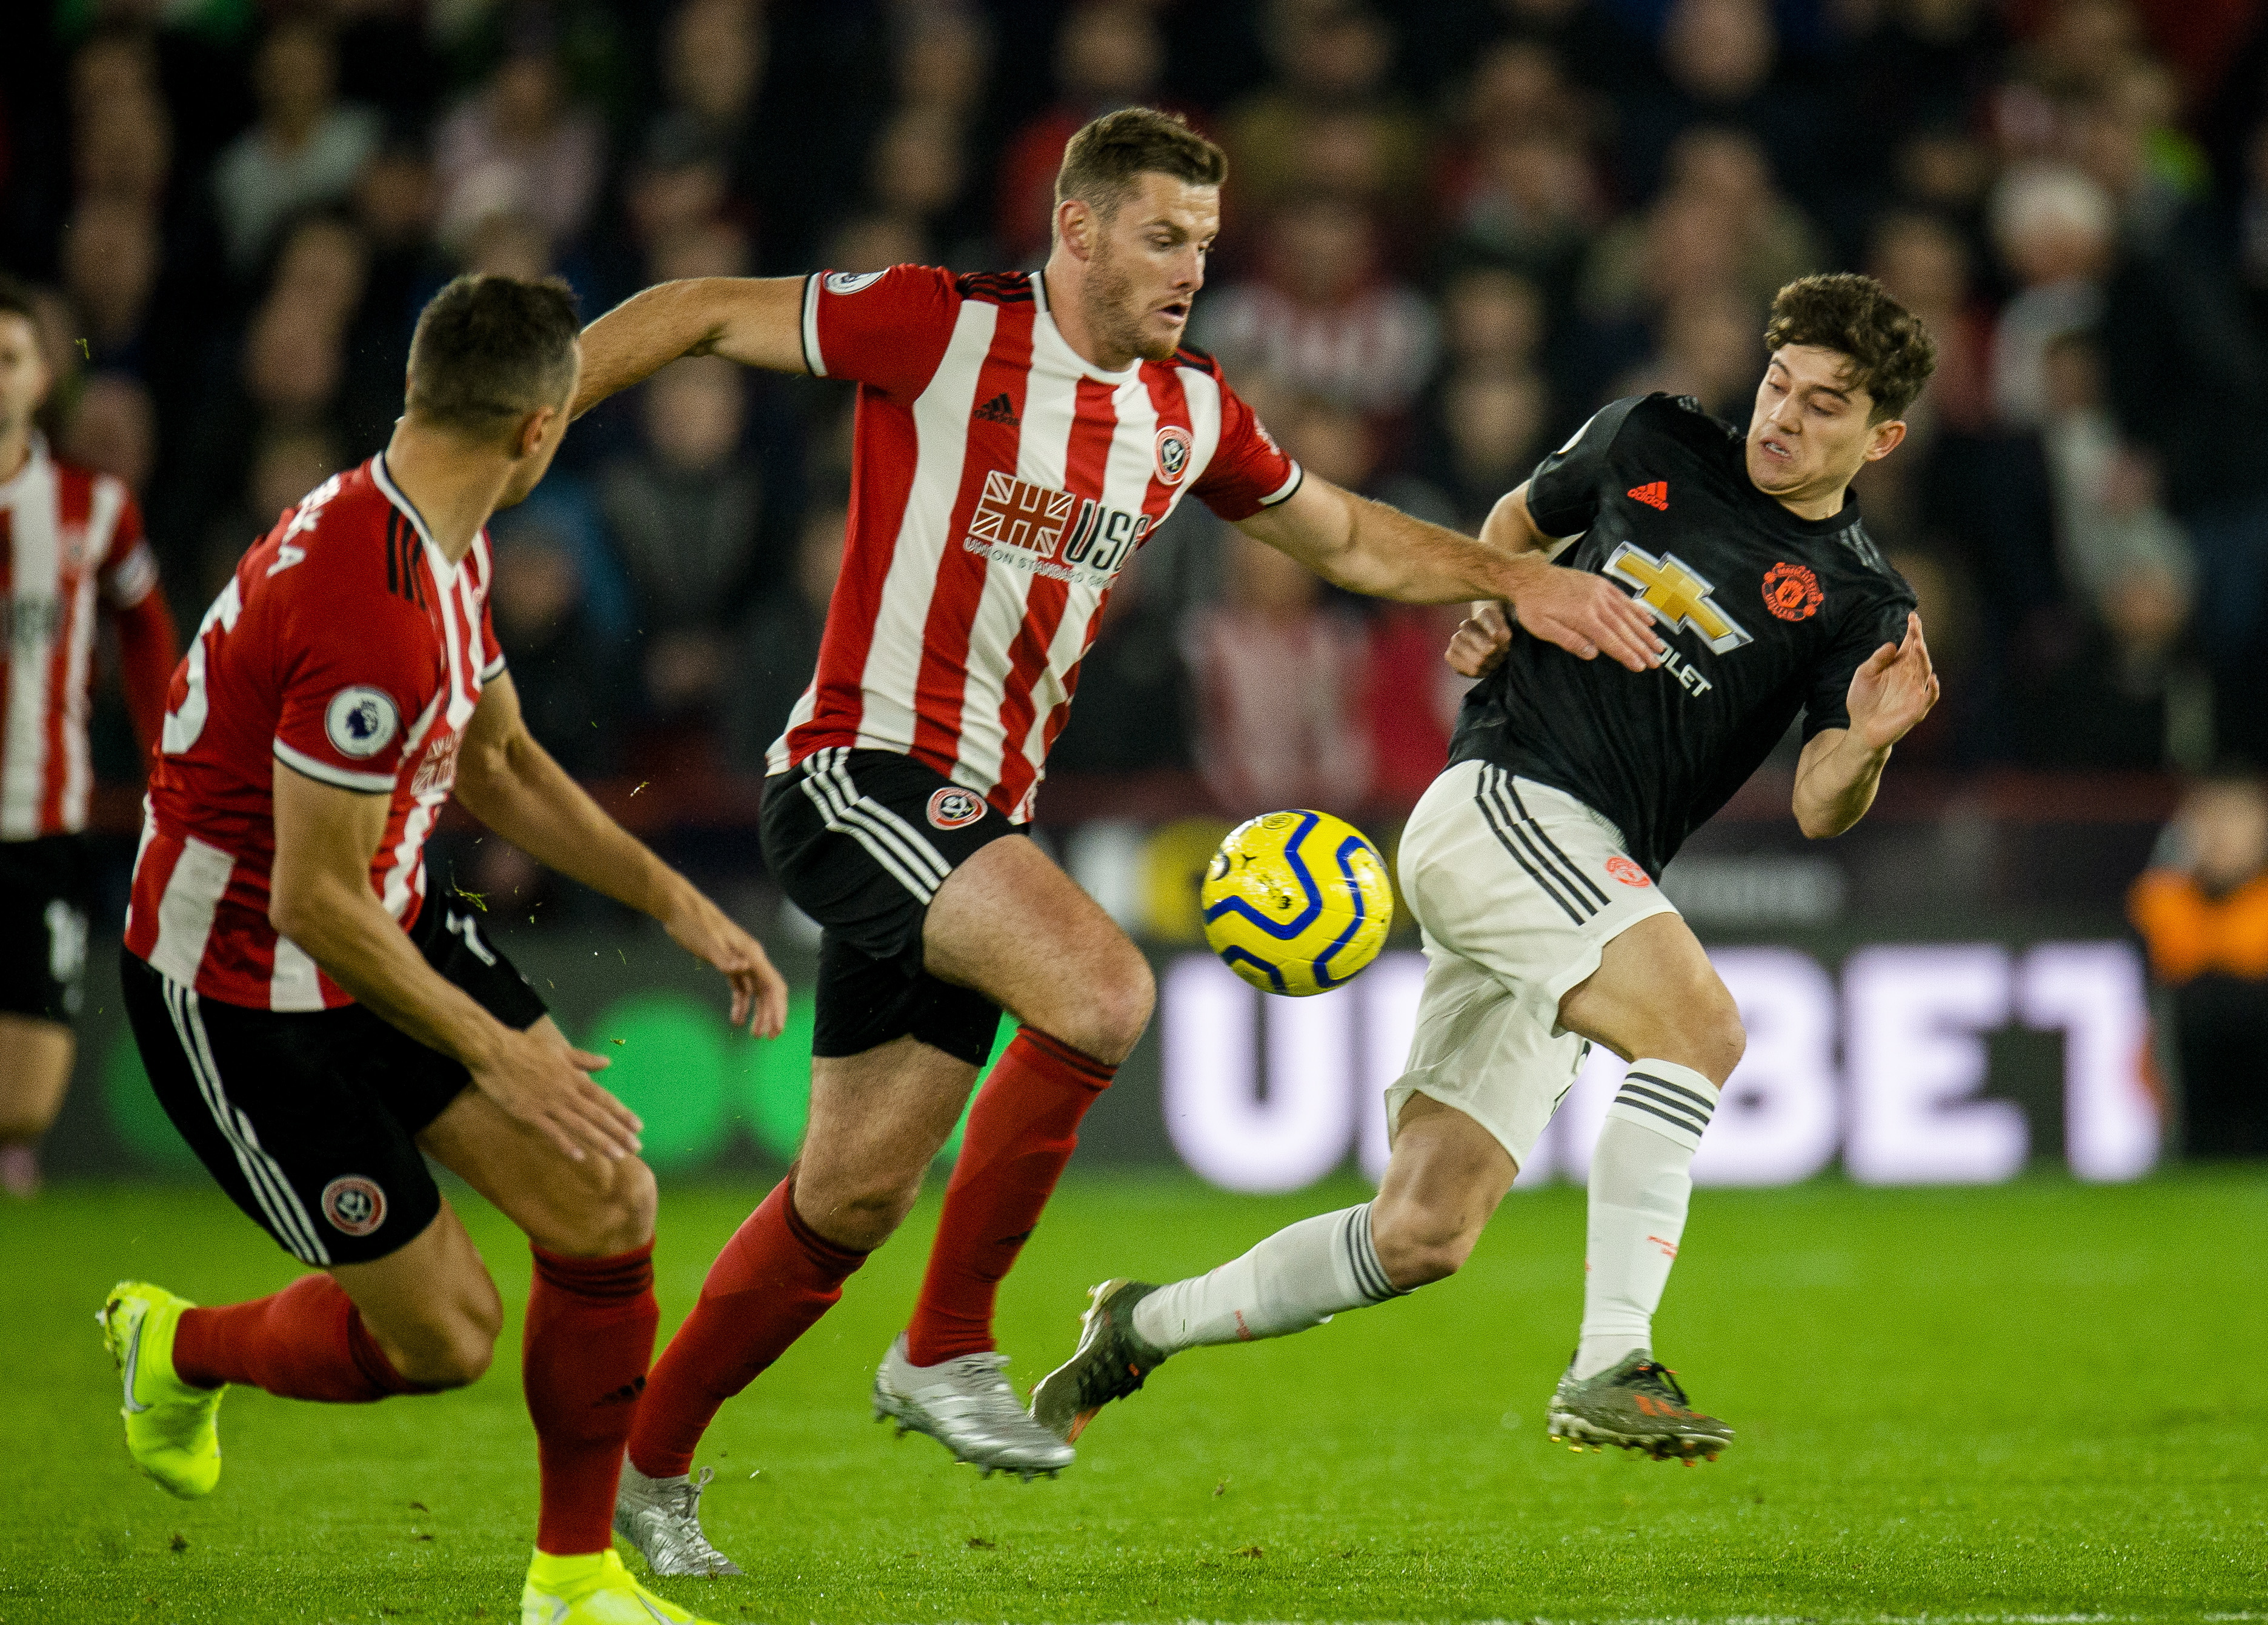 epa08022489 Sheffield United's Jack O'Connell (L) in action with Manchester United's Daniel James (R) during the English Premier League soccer match between Sheffield United and Manchester United held at the Bramhall Lane in Sheffield , Britain, 24 November 2019.  EPA/PETER POWELL EDITORIAL USE ONLY. No use with unauthorized audio, video, data, fixture lists, club/league logos or 'live' services. Online in-match use limited to 120 images, no video emulation. No use in betting, games or single club/league/player publications